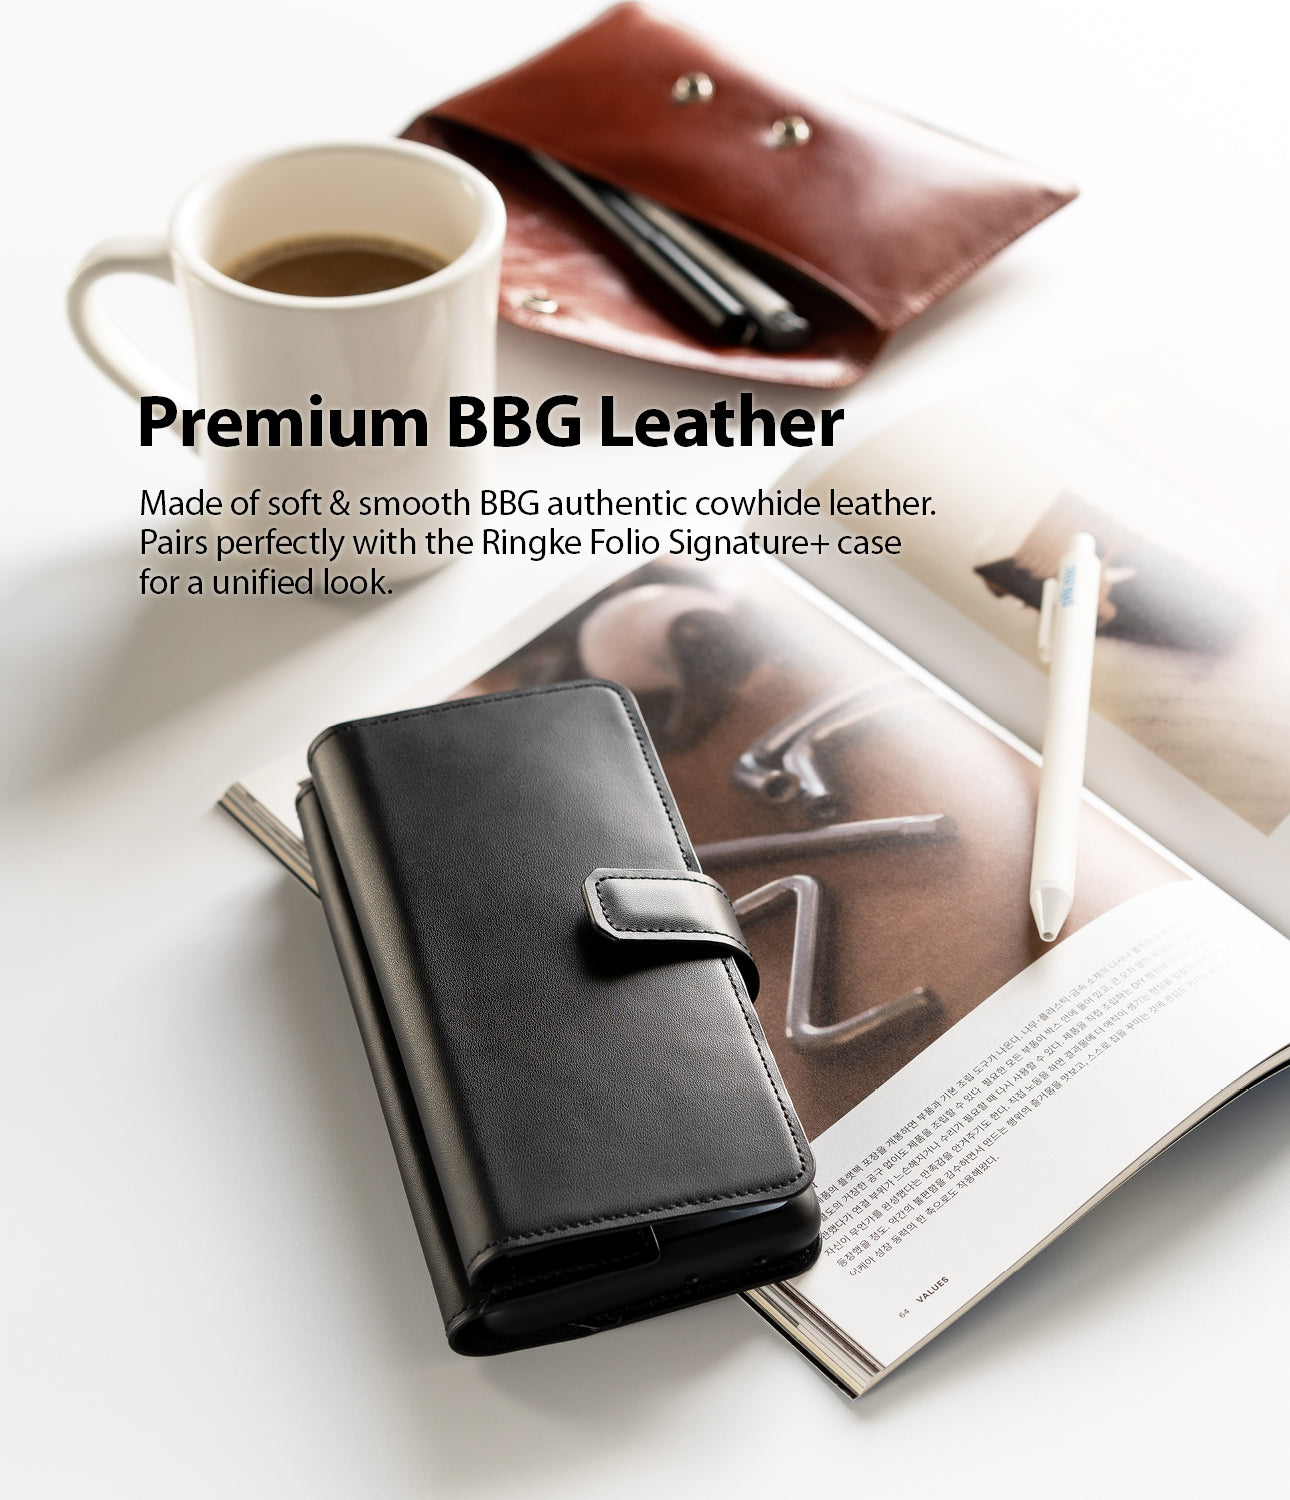 premium bbg leather - made of soft  and smooth bbg authentic cowhide leather